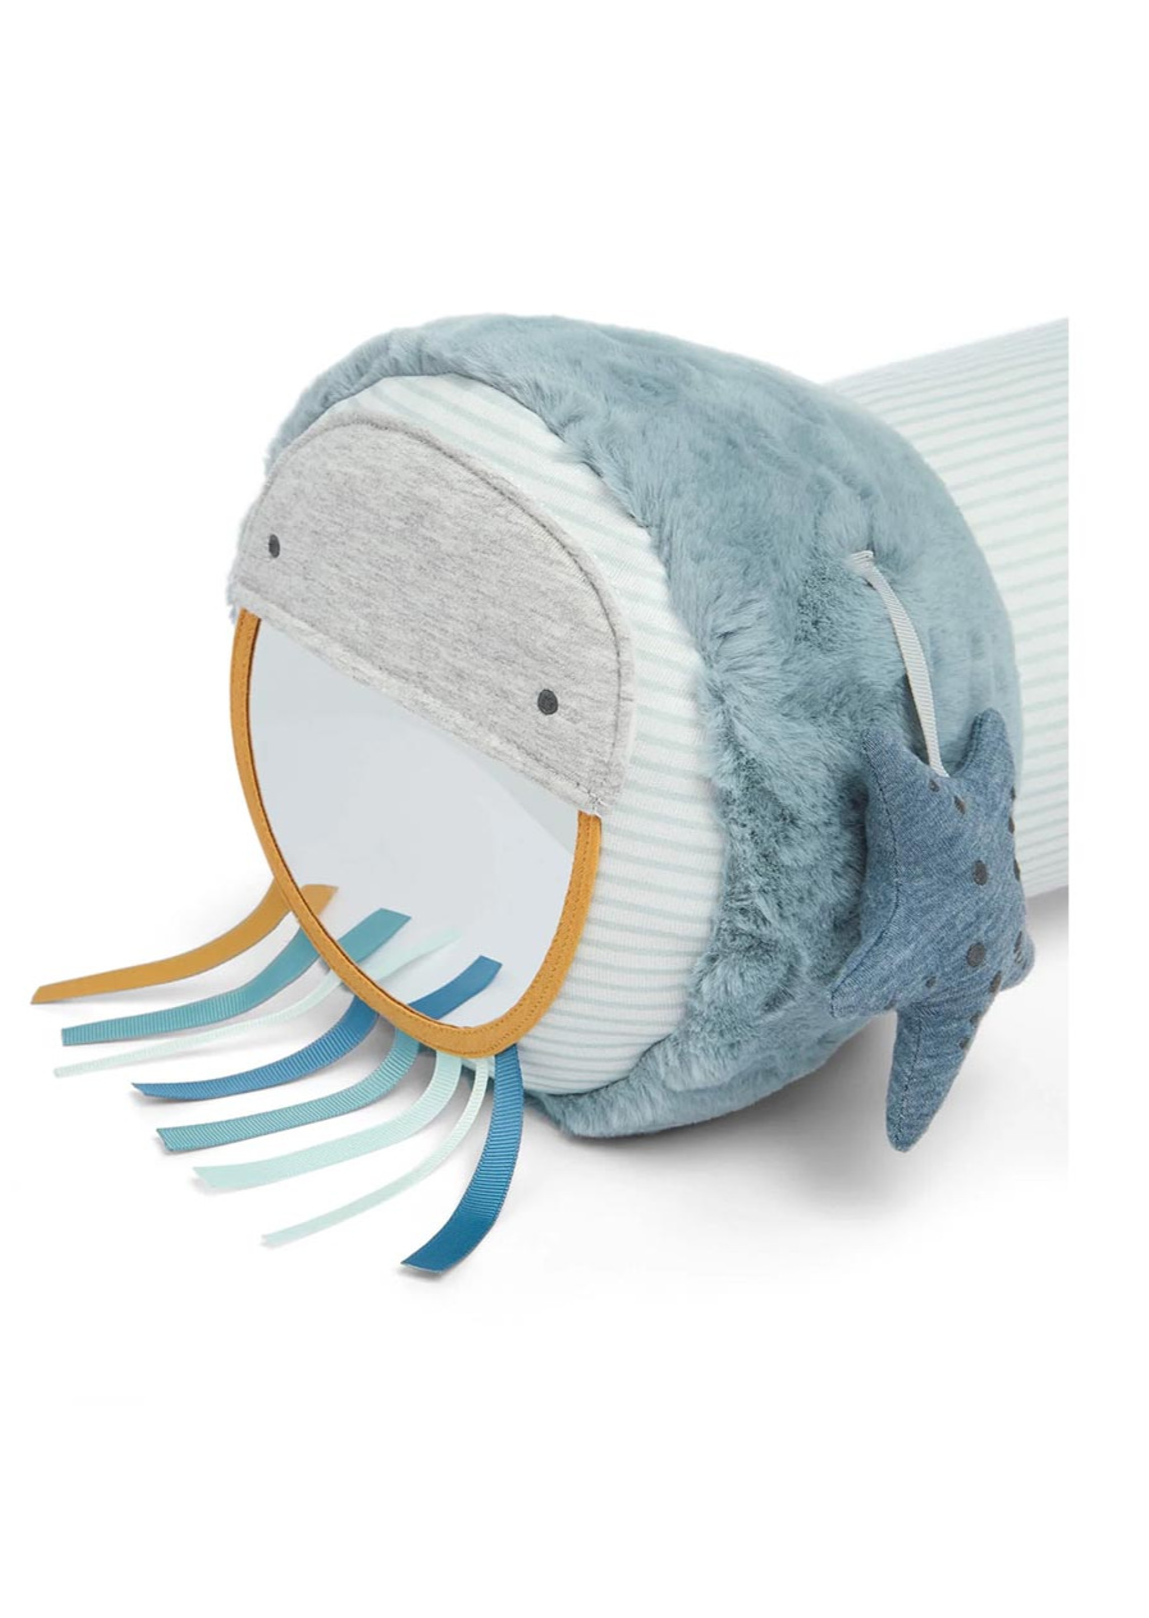 Mamas and Papas Tummy Time Roller Blue Under the Sea